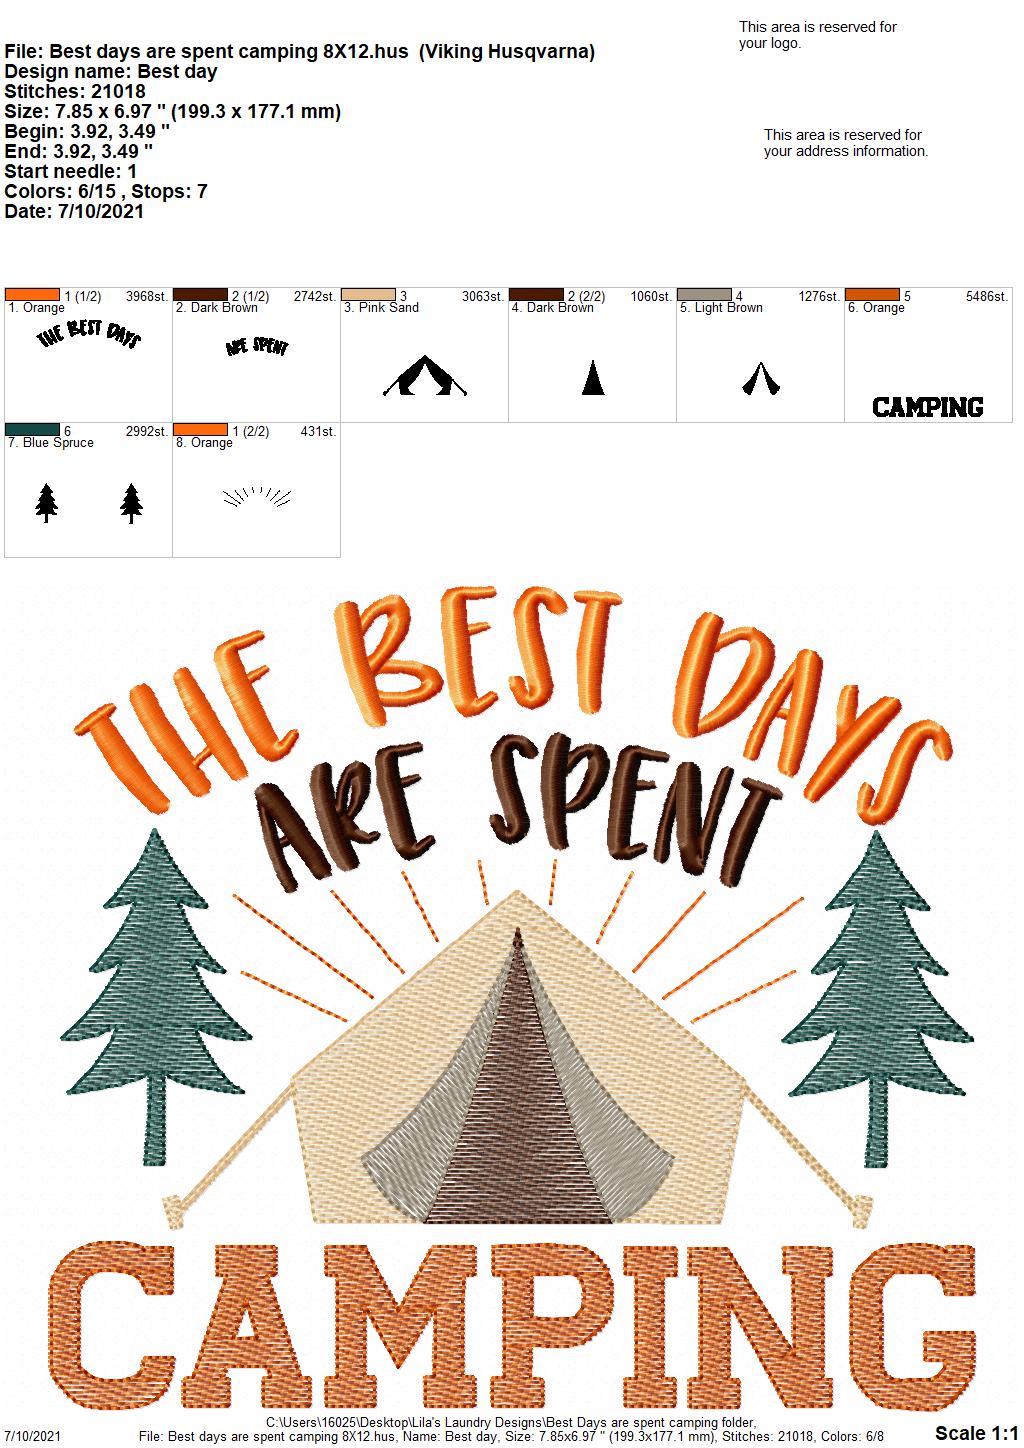 The Best Days are Spent Camping - 3 sizes- Digital Embroidery Design